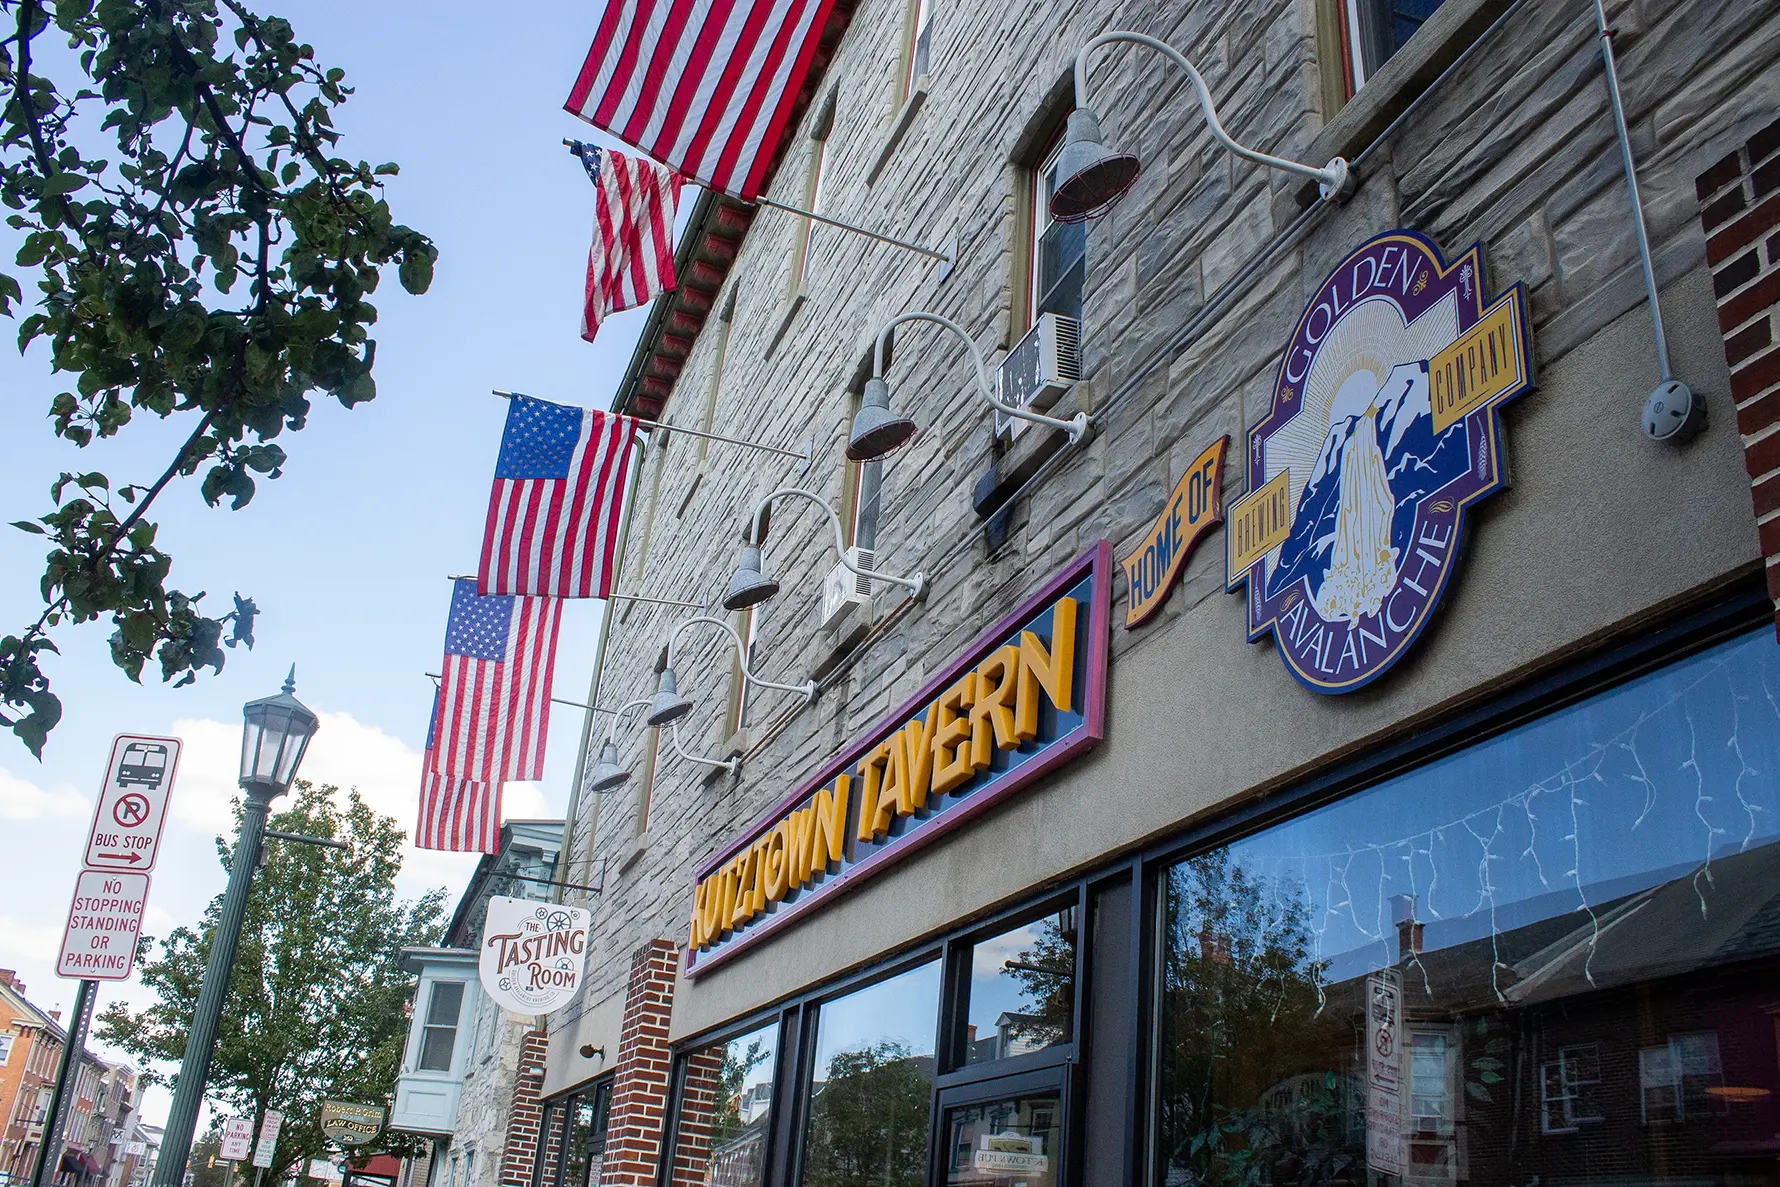 A photo of the Kutztown Tavern sign on Main Street, taken from an artsy angle.